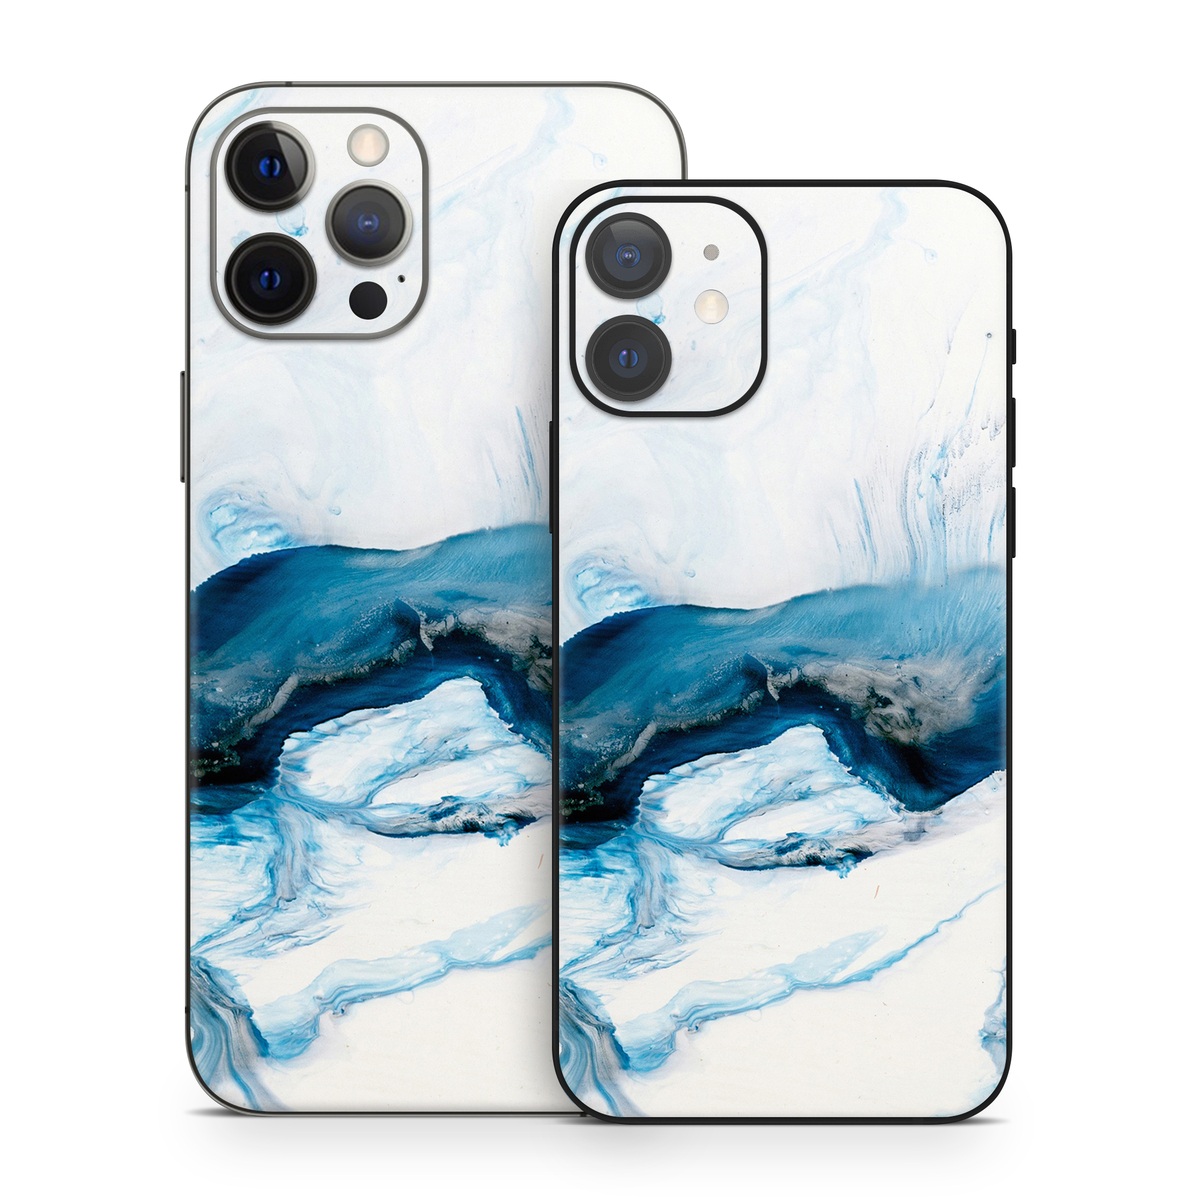 iPhone 12 Series Skin design of Glacial landform, Blue, Water, Glacier, Sky, Arctic, Ice cap, Watercolor paint, Drawing, Art, with white, blue, black colors